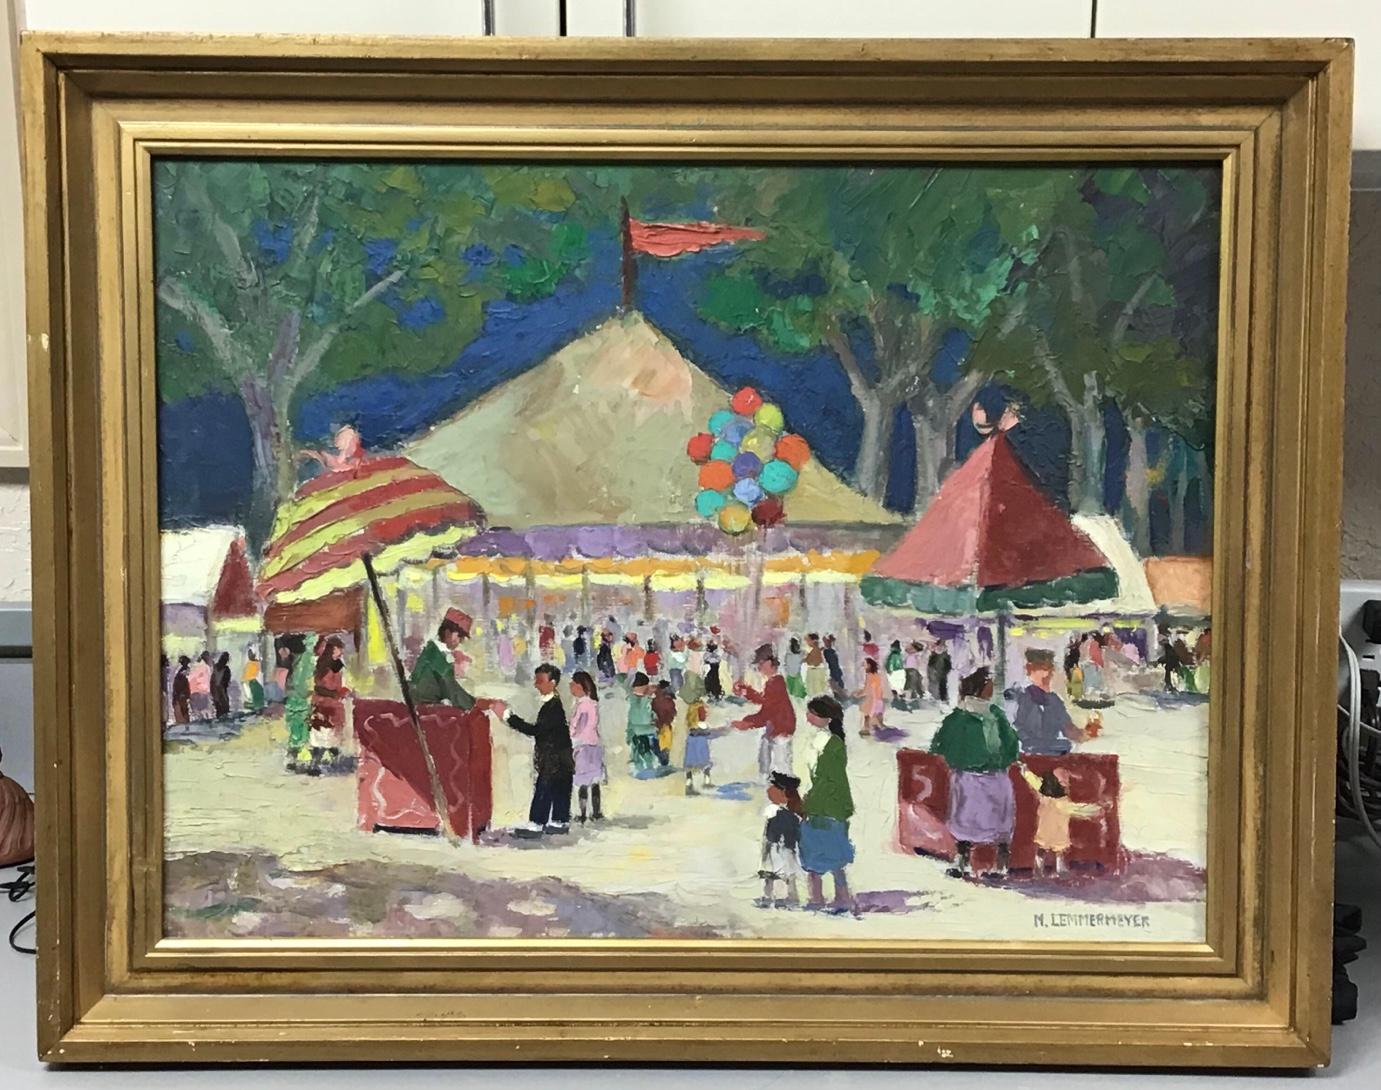 Michael Lemmermeyer (American, 1891-1970).
Framed Oil on Canvas in heavy impasto paint. Wonderful scene of a circus with children and adults around circus tents having fun. Bright cheerful colors. Very well executed impressionist painting.